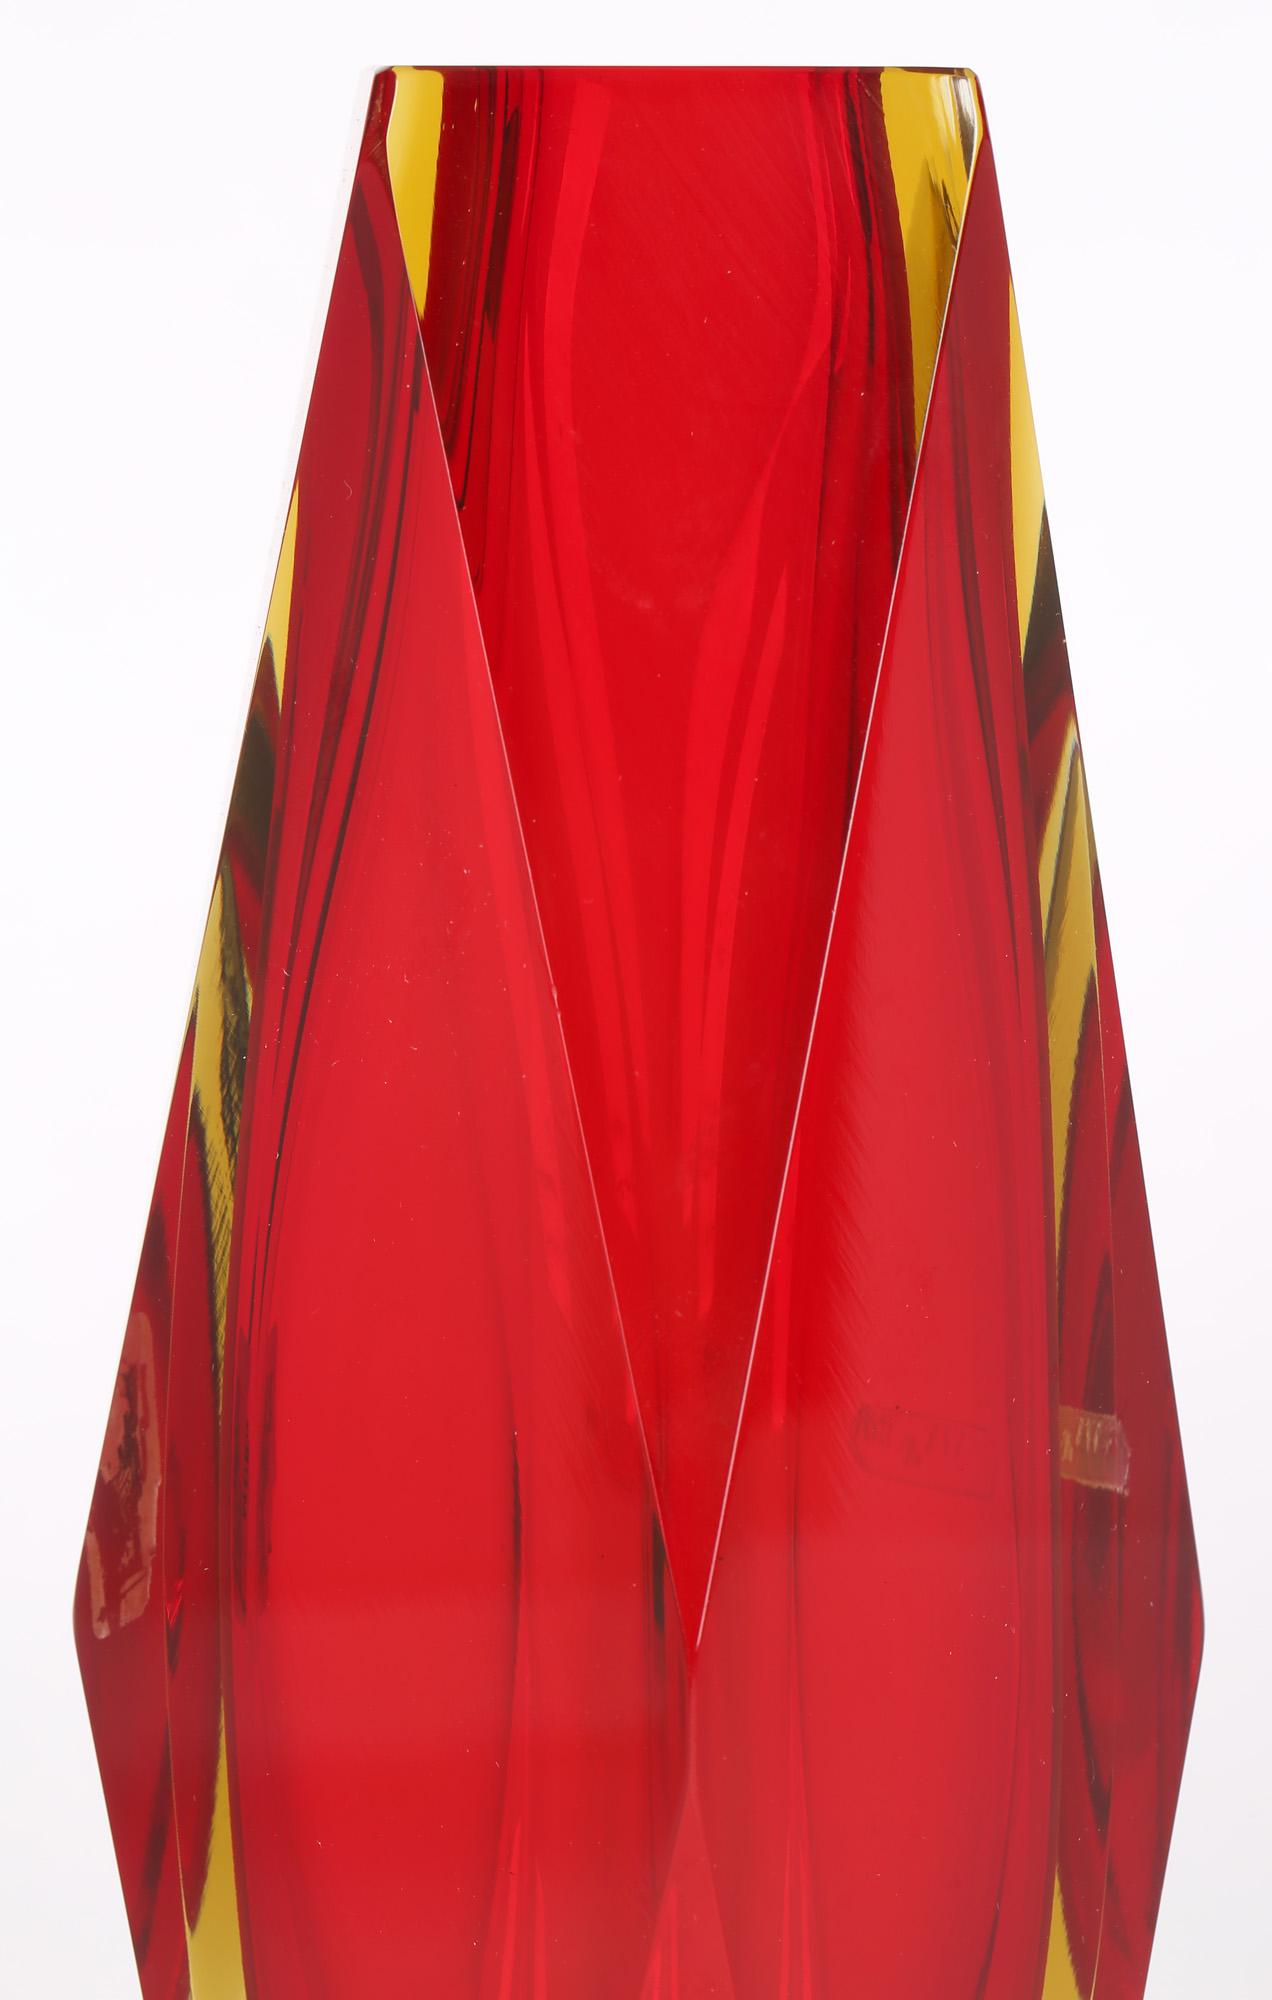 Pagnin & Bon Italian Murano Red and Yellow Sommerso Facet Cut Glass Vase For Sale 1